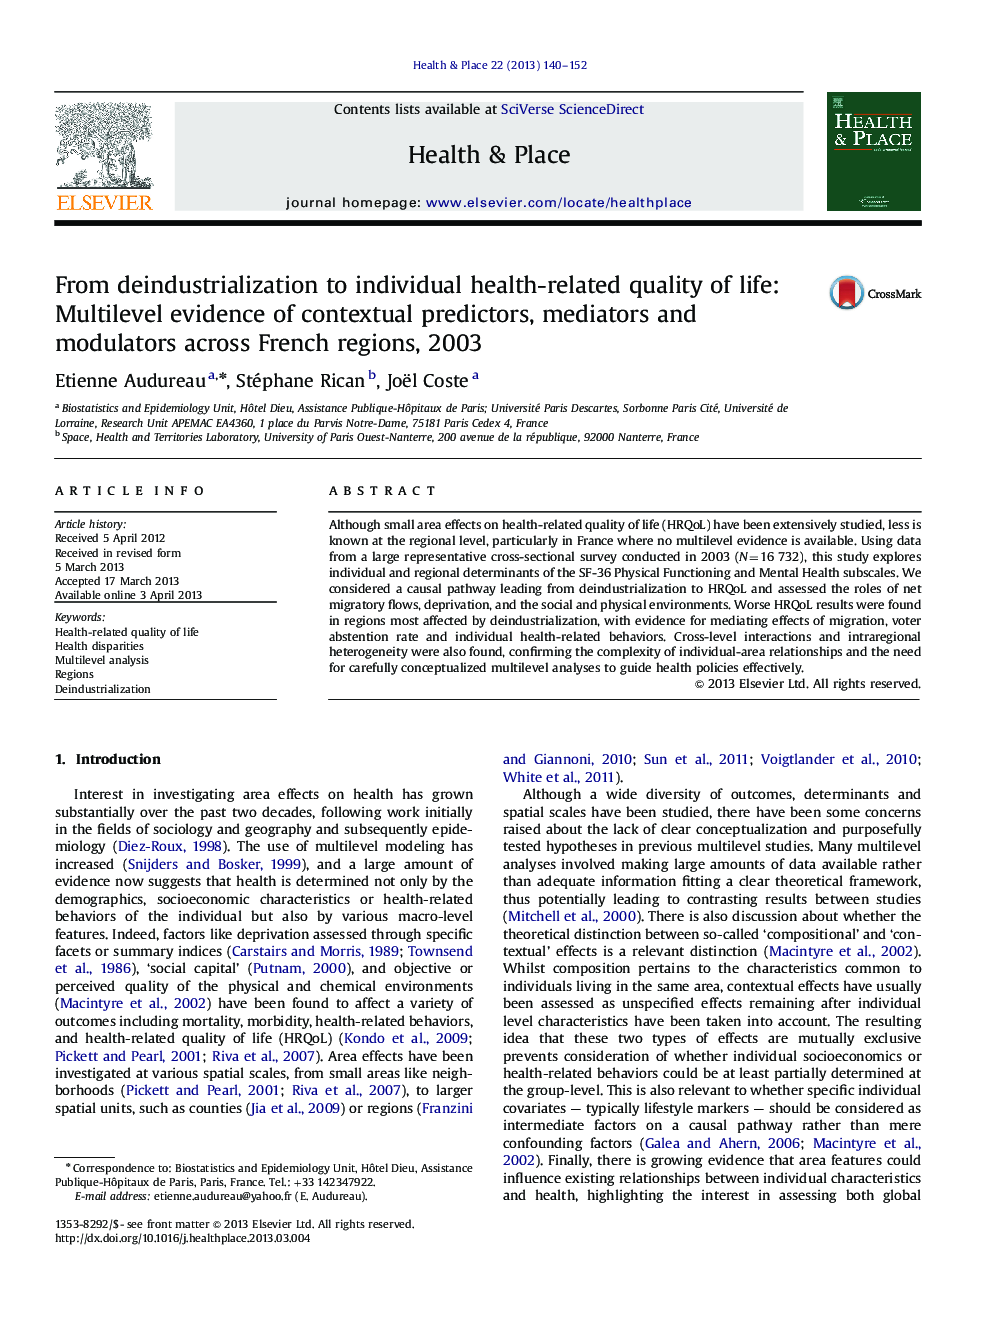 From deindustrialization to individual health-related quality of life: Multilevel evidence of contextual predictors, mediators and modulators across French regions, 2003